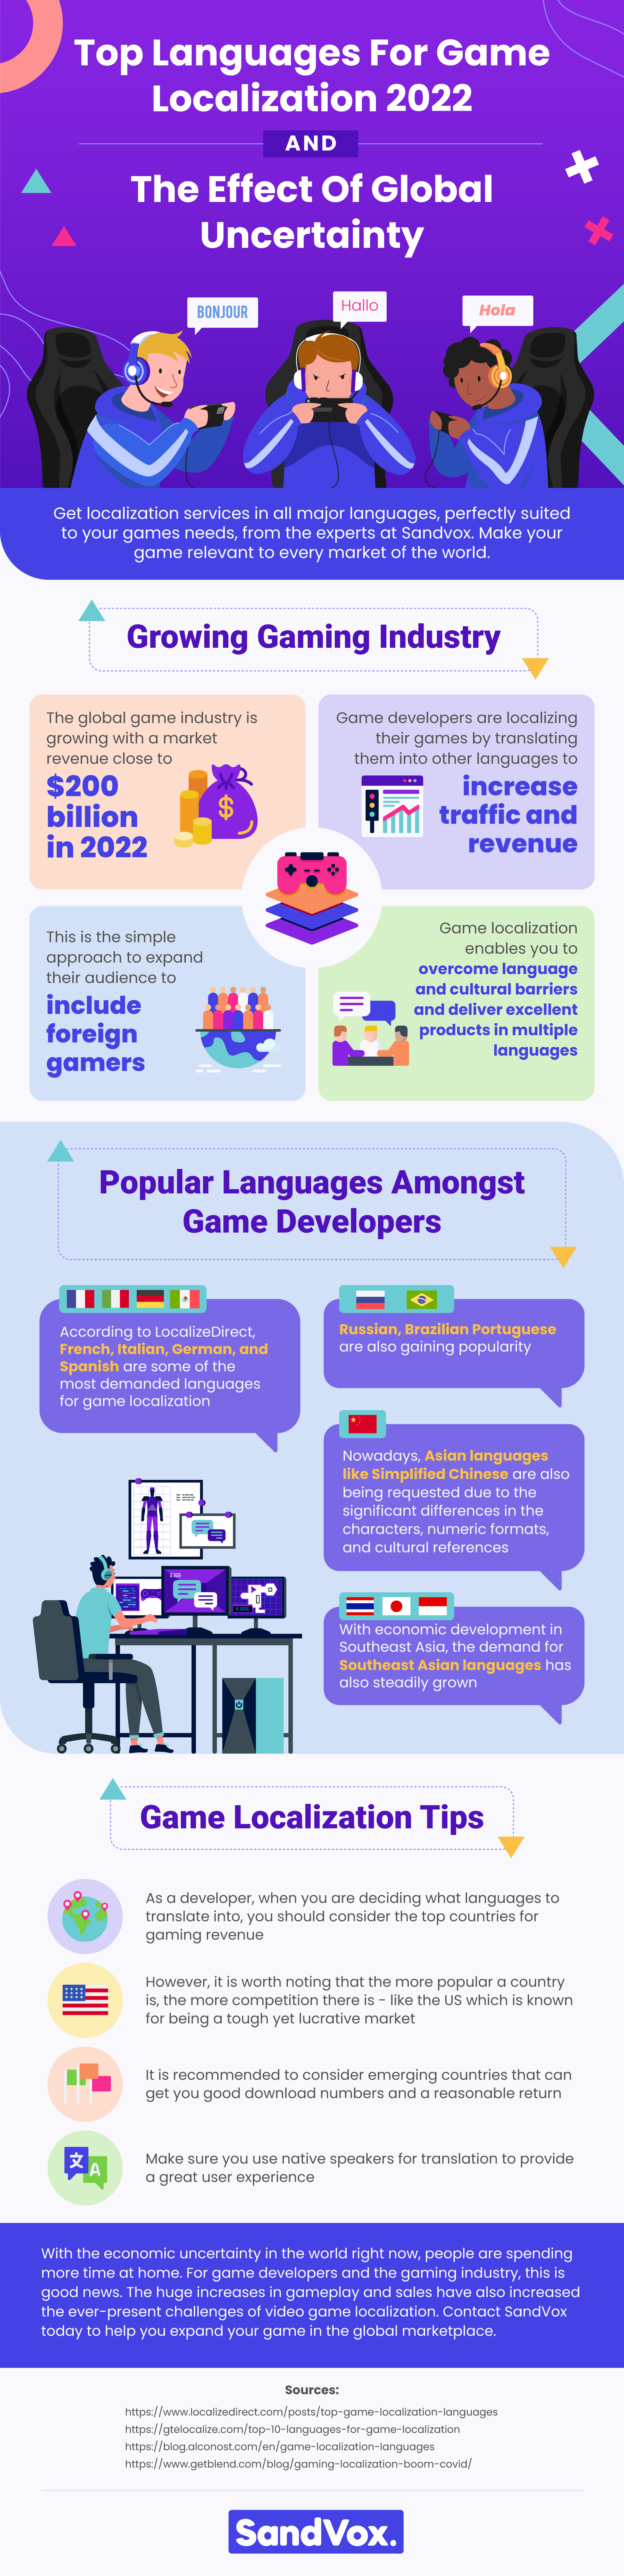 SandVox - Top Languages For Game Localization 2022 and Beyond